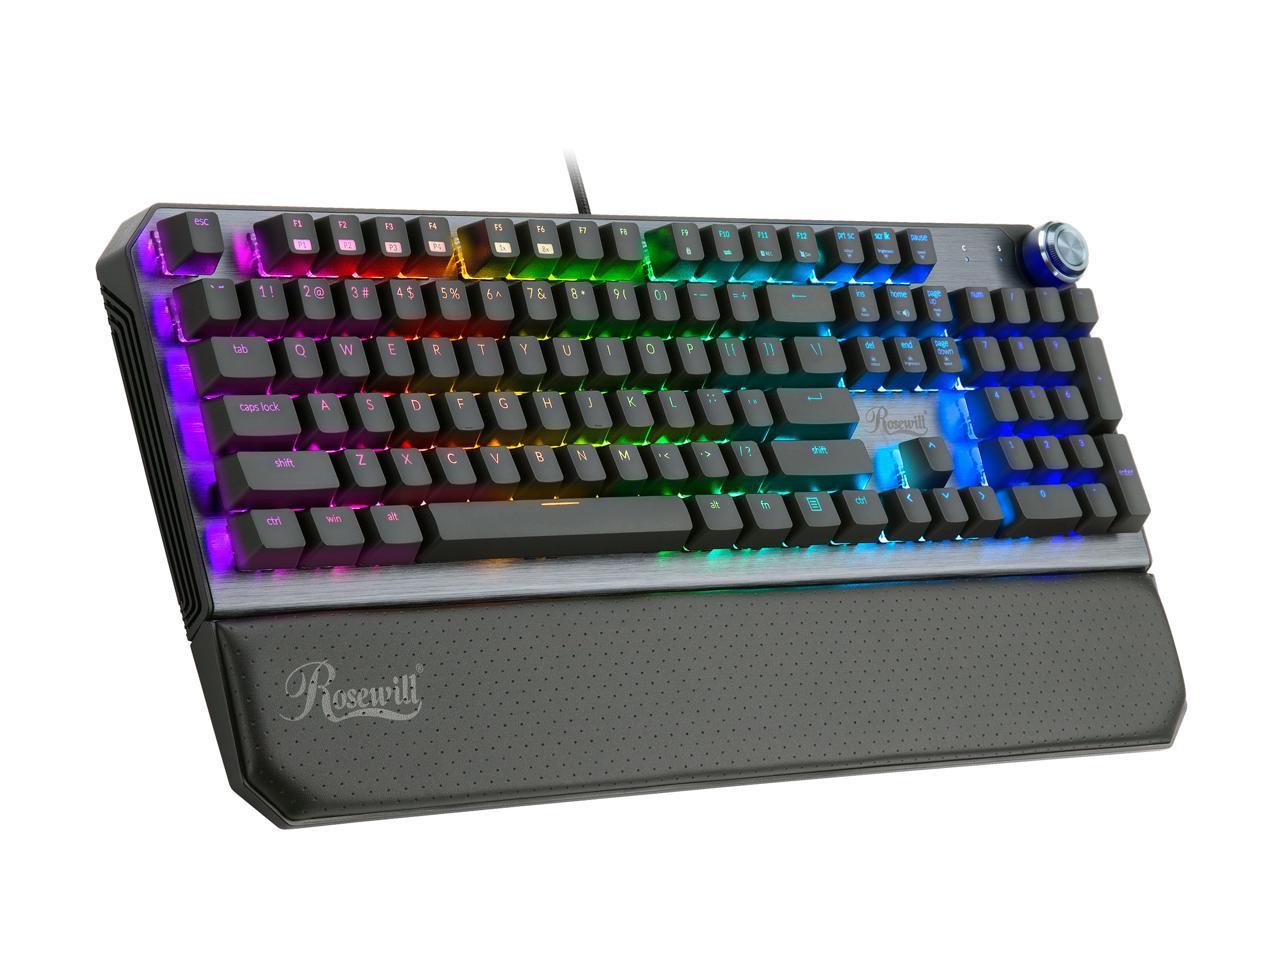 Rosewill NEON K91 RGB S Mechanical Gaming Keyboard with Cherry MX Silver Switches, RGB Underglow and 17 Backlit Modes, Multifunctional Dial Control, Wrist Rest and PBT Keycap Set